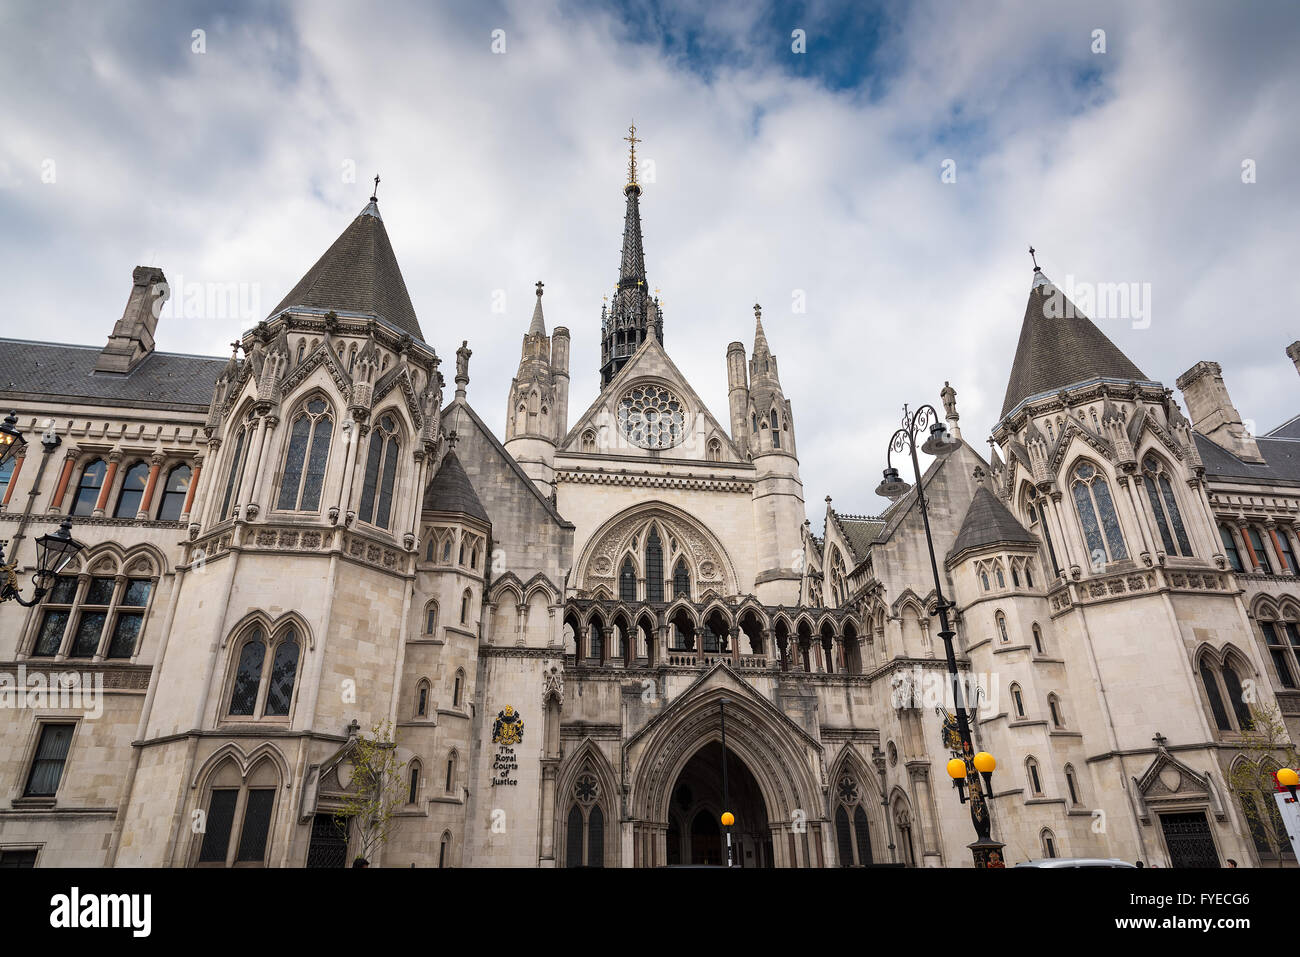 The Royal Courts of Justice in central London England Stock Photo